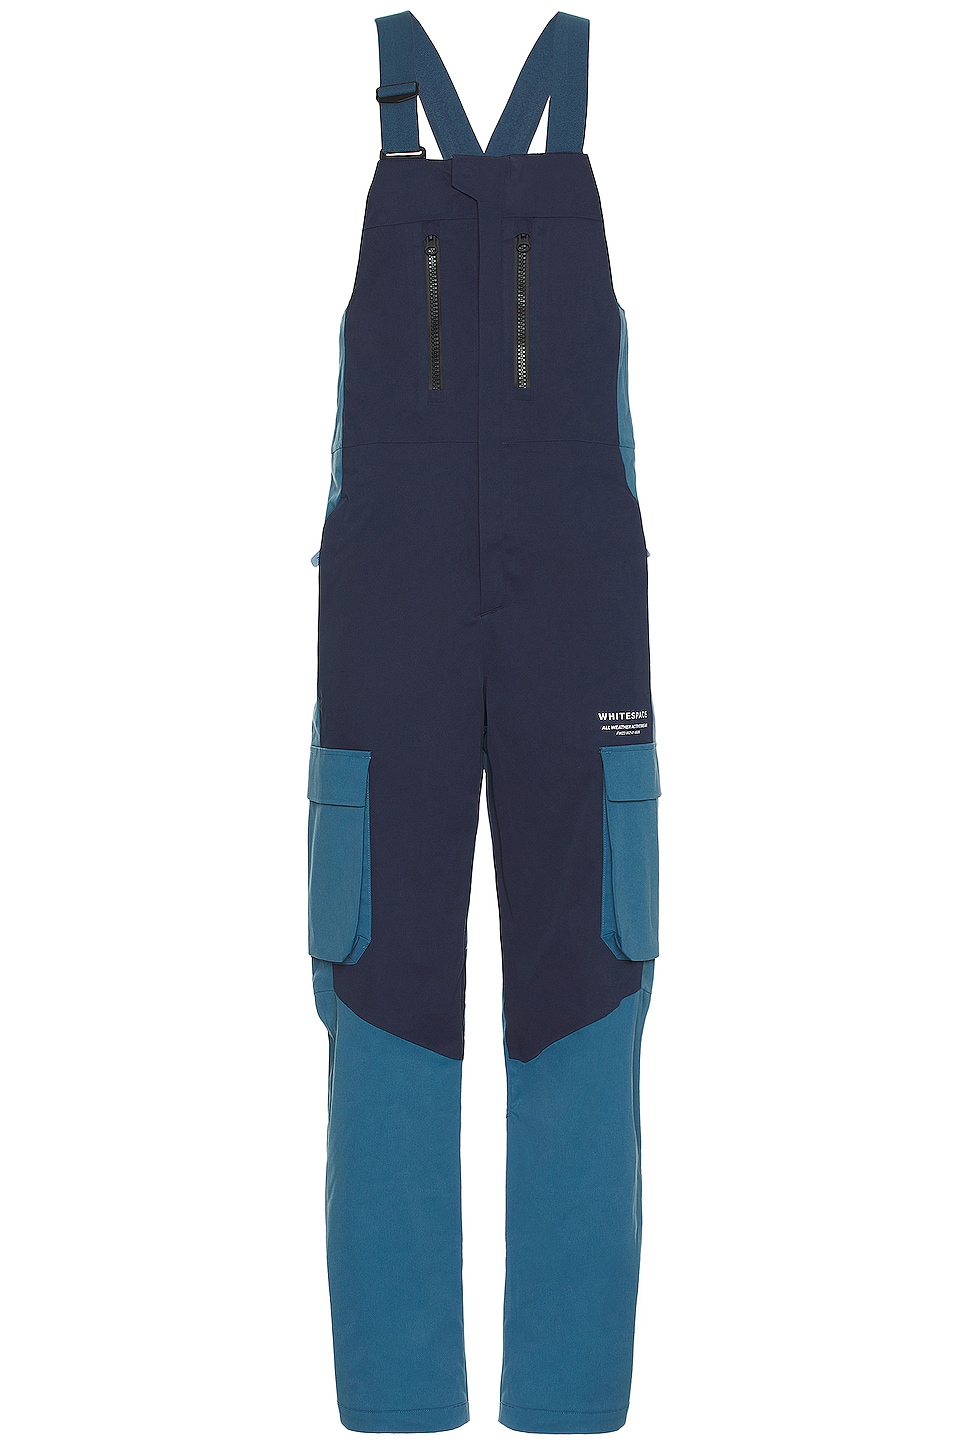 Whitespace 2l Insulated Cargo Bib Pant in Blue